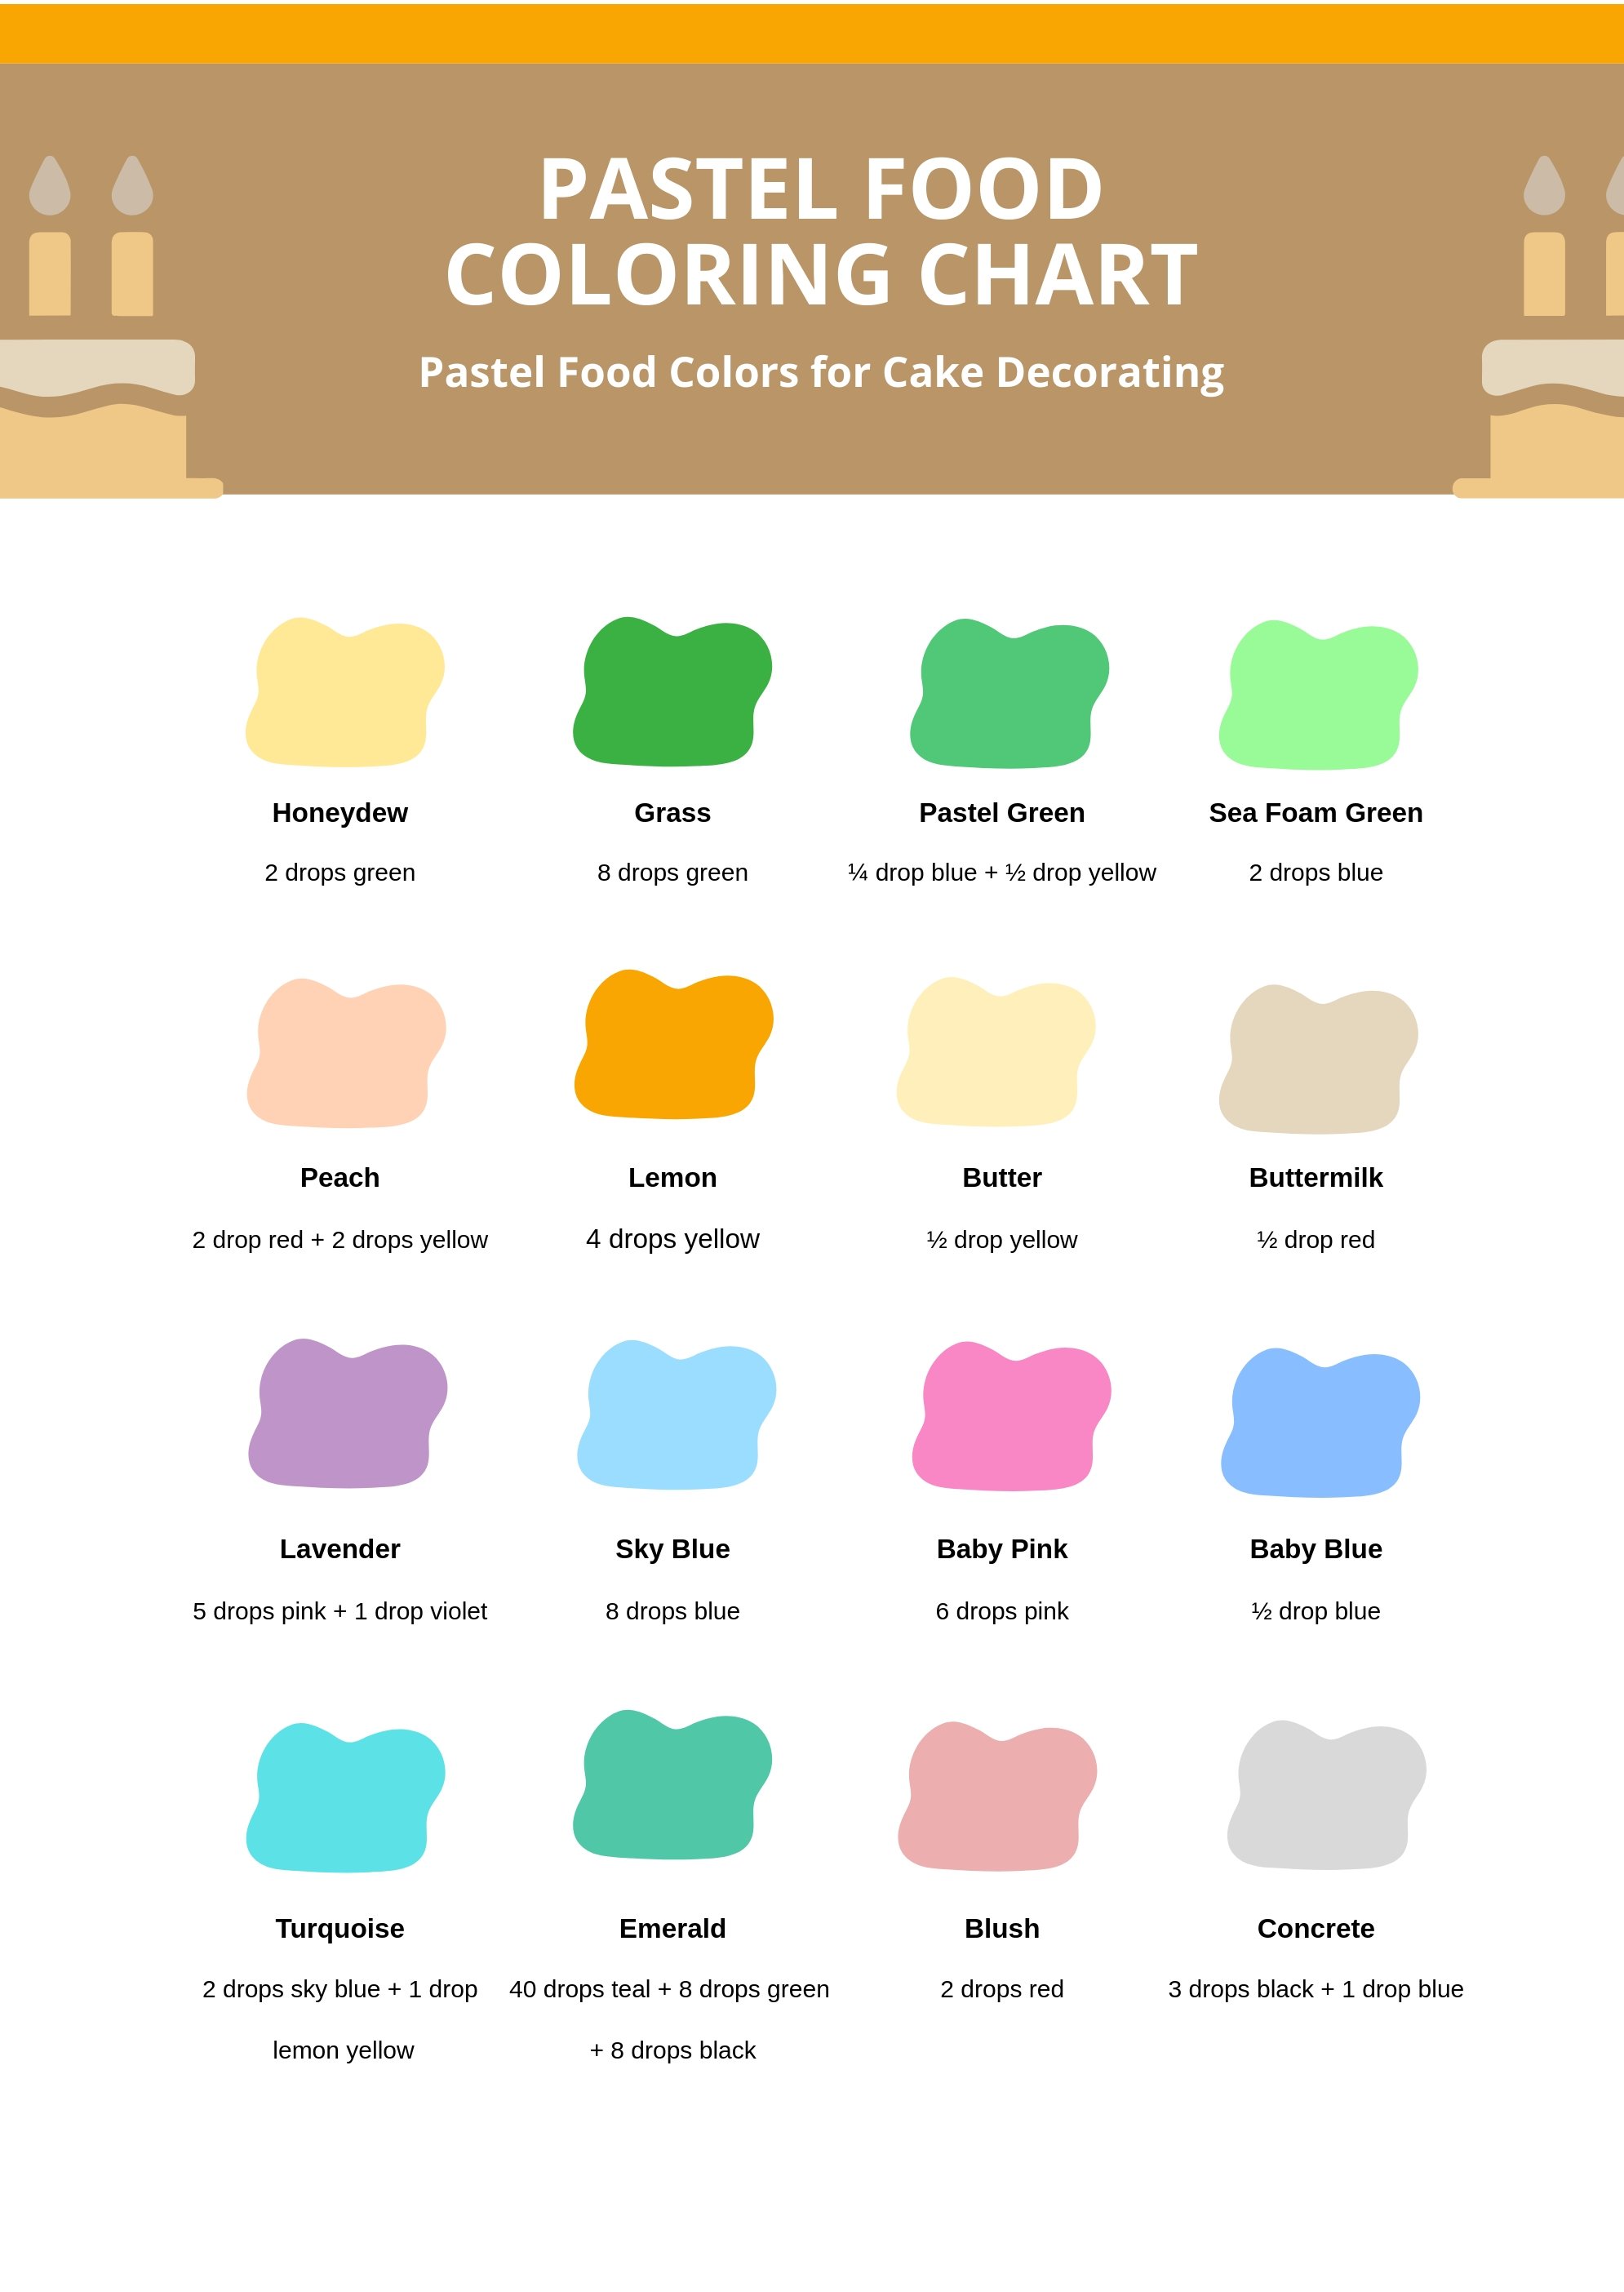 Pastel Food Coloring Chart